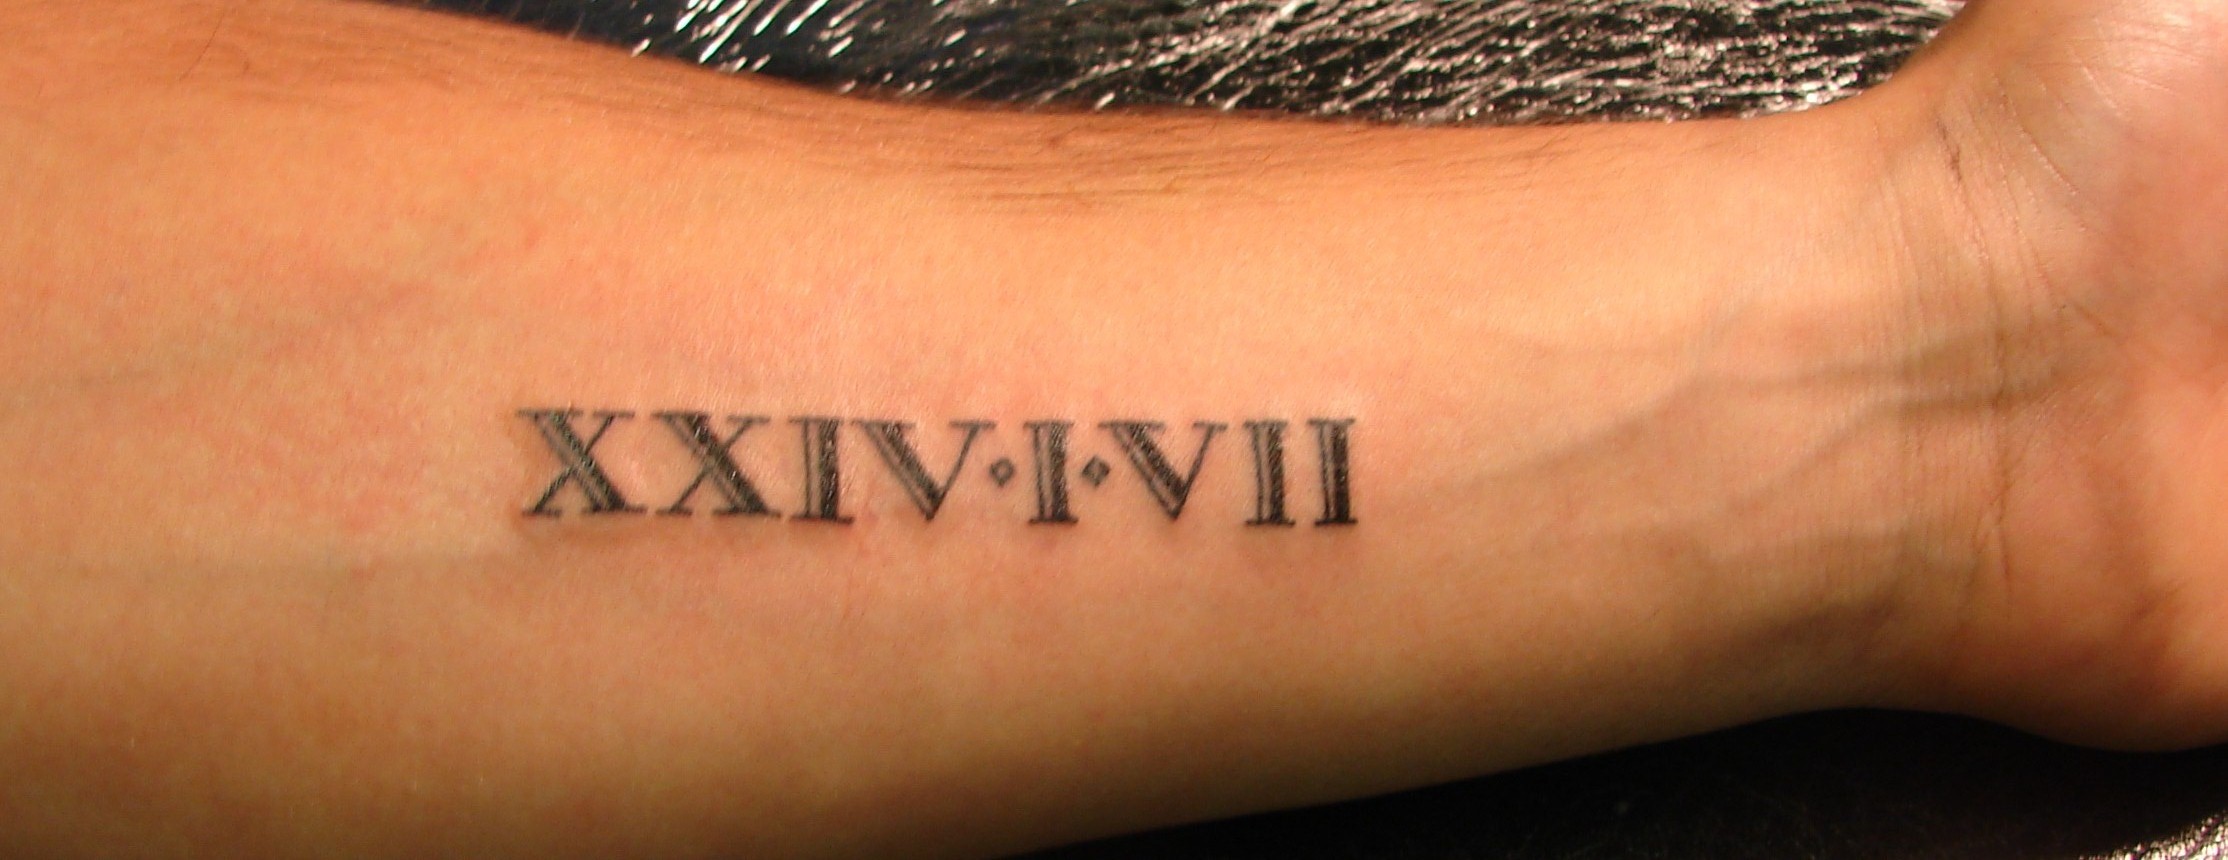 4. "2019 Roman Numerals Tattoo Placement" - wide 1